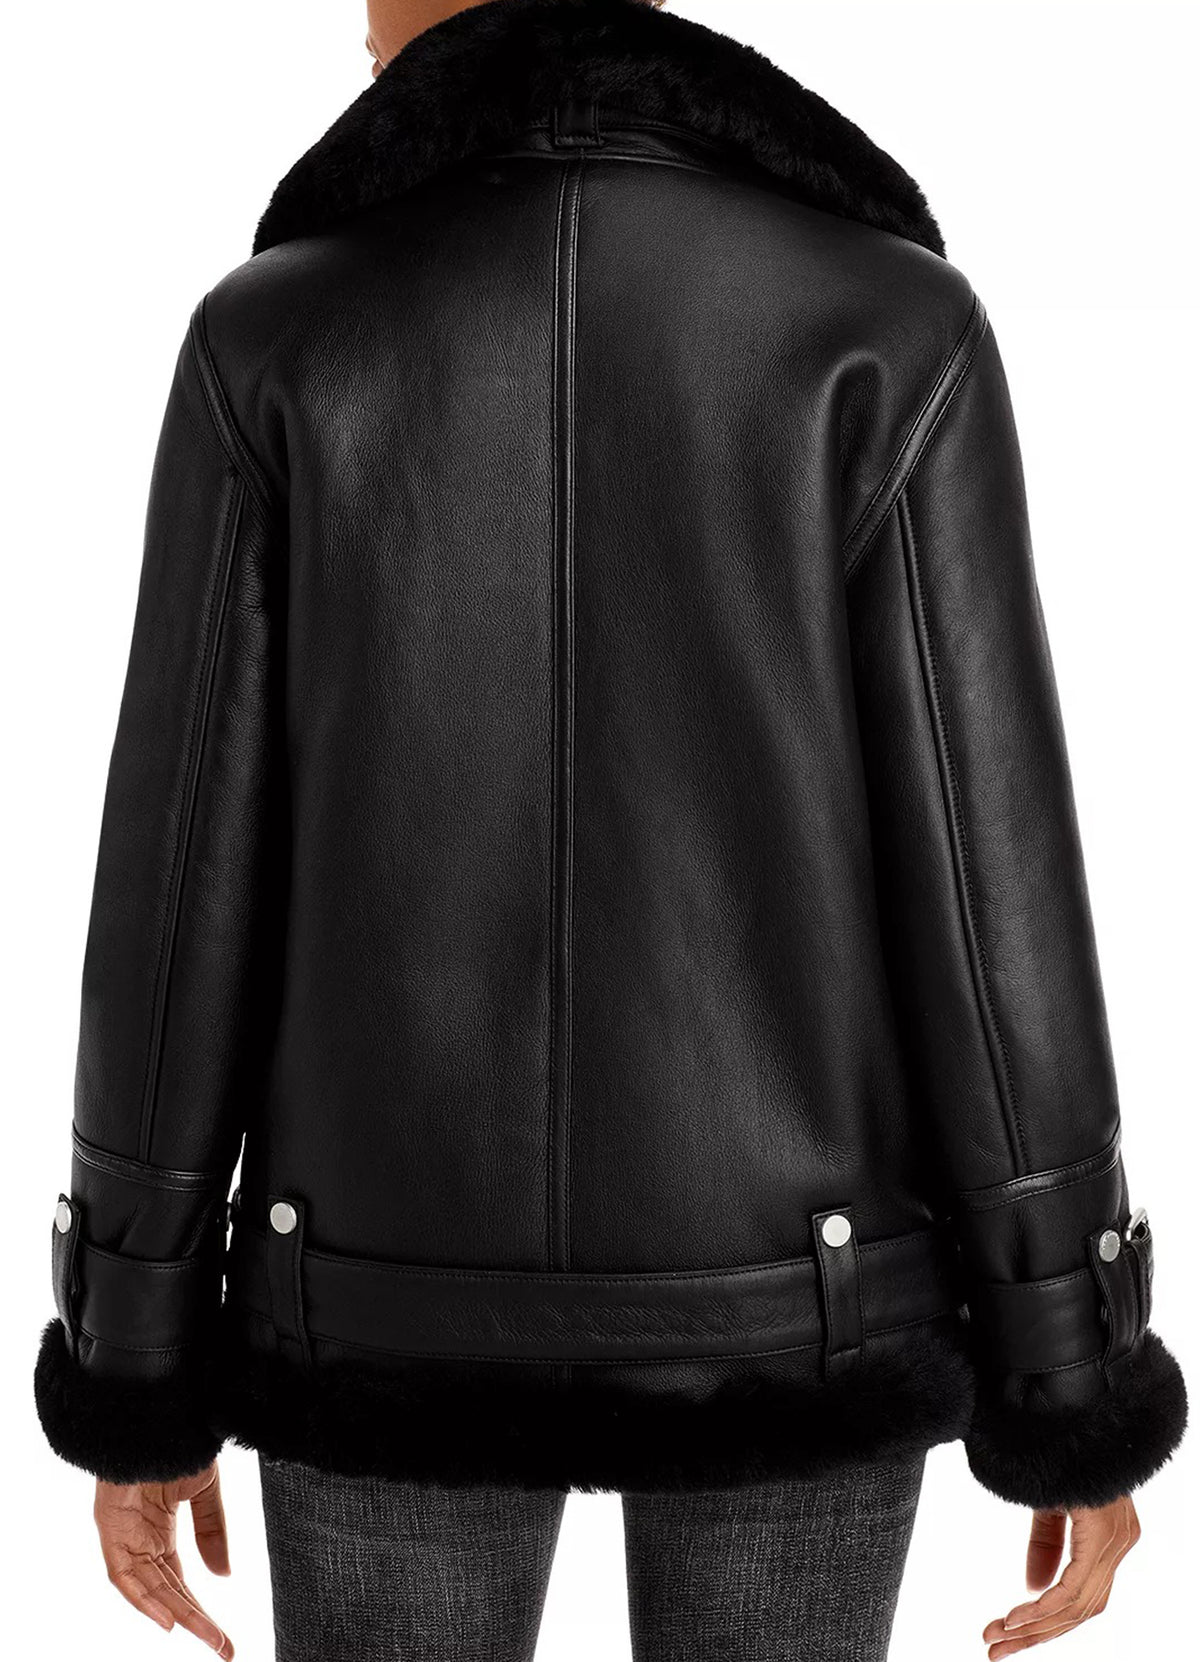 Womens Jet Black Shearling Leather Jacket | Shop Now!